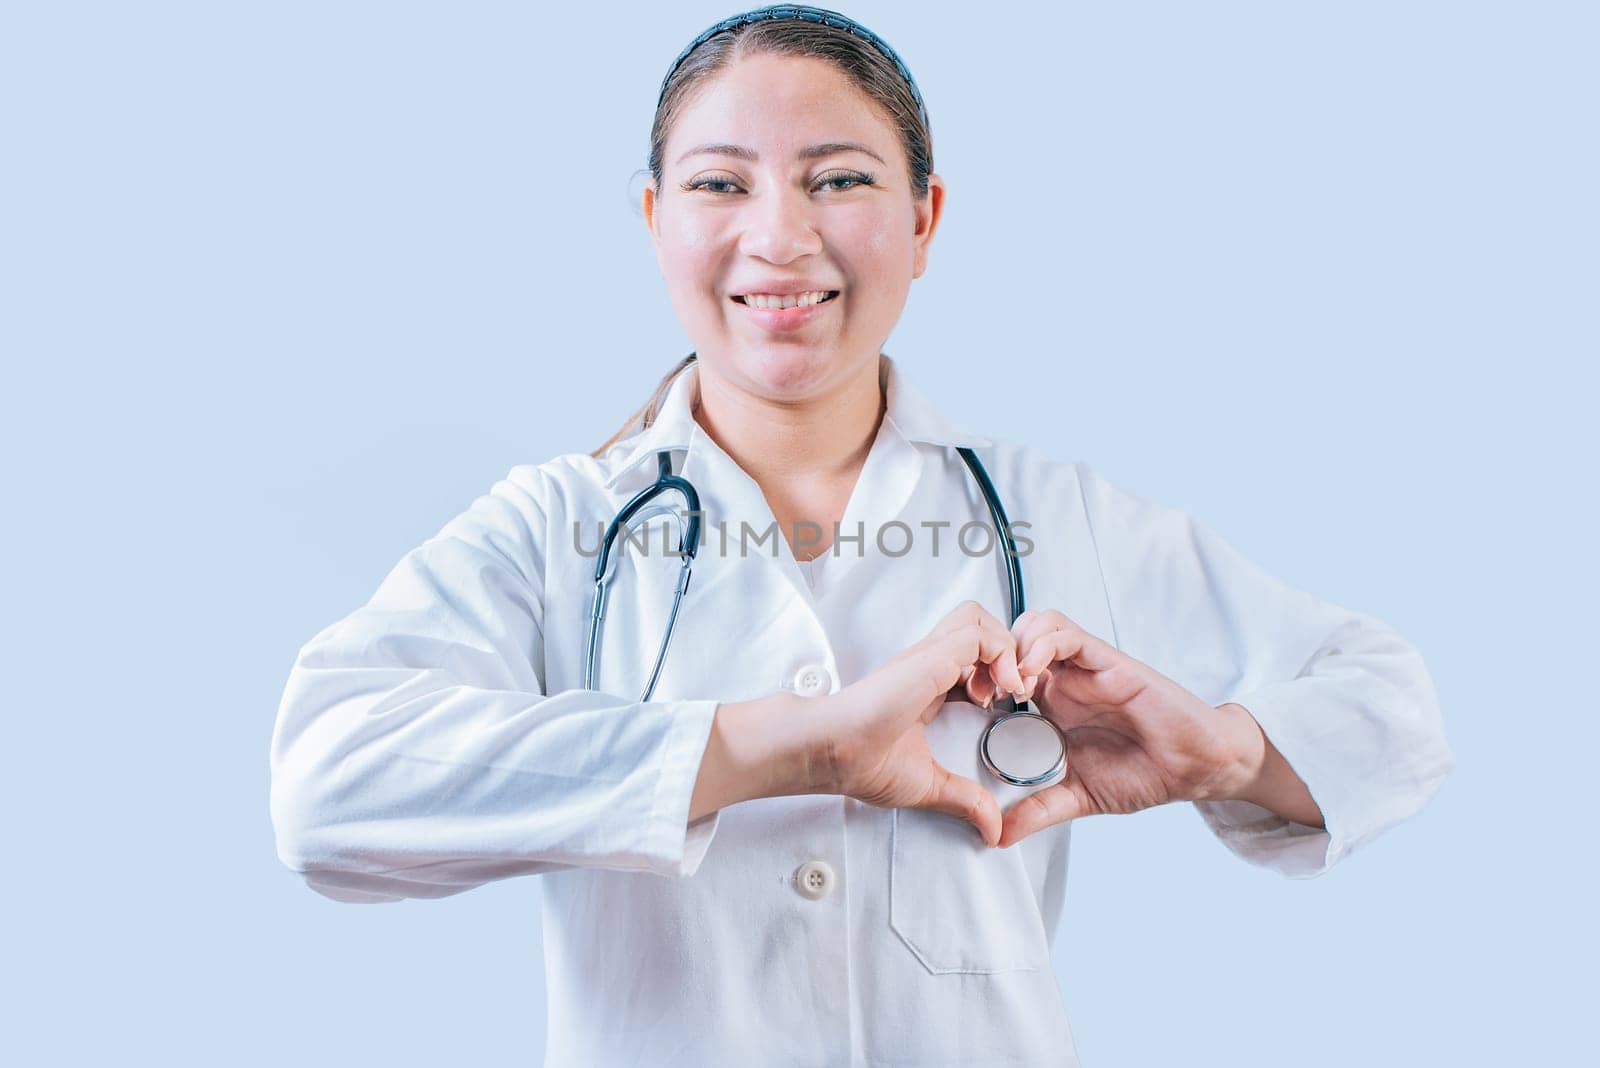 Smiling doctor making heart shape on isolated background. Friendly female doctor making heart gesture with hands isolated by isaiphoto